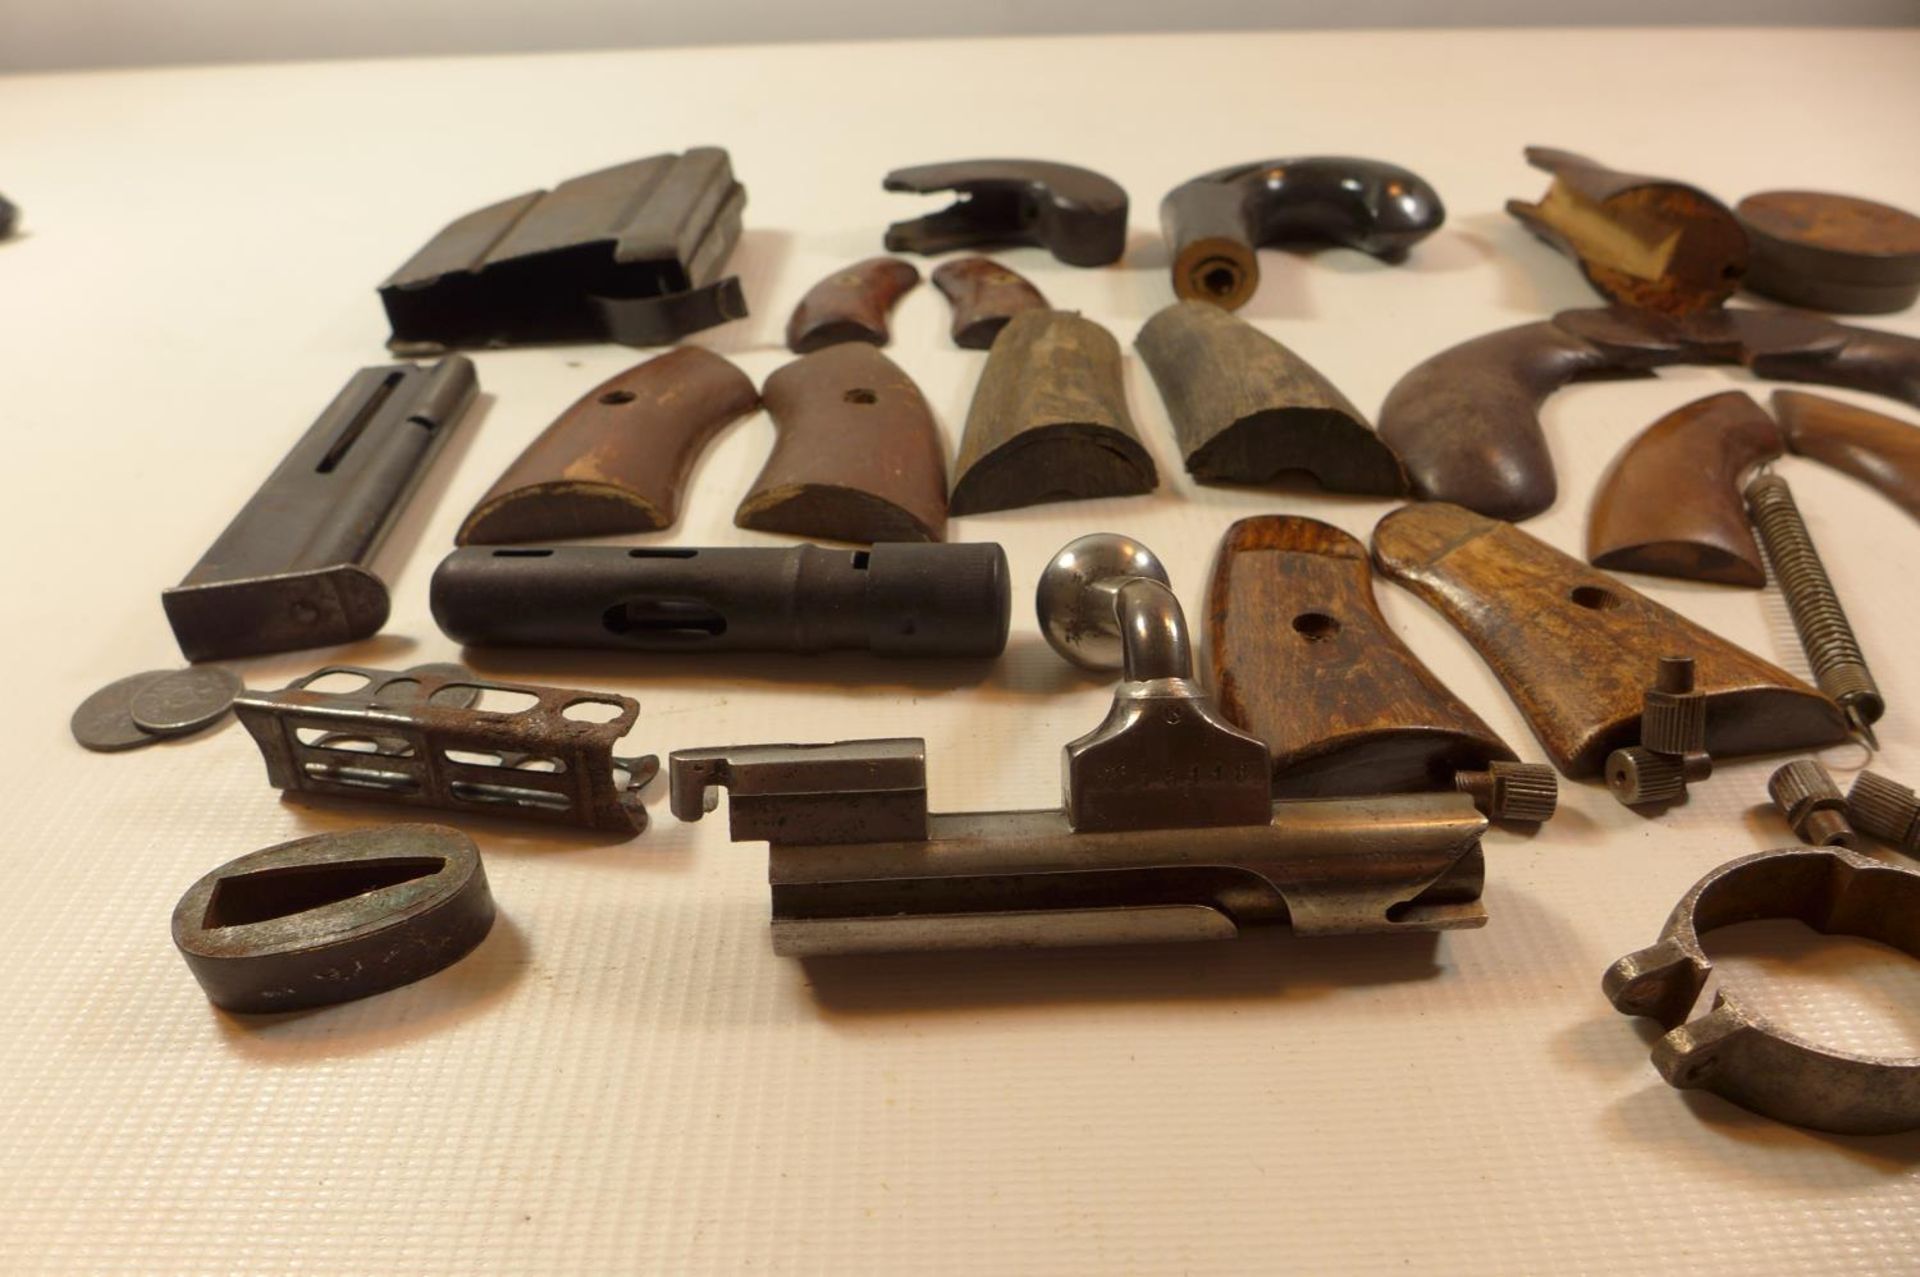 A COLLECTION OF GUN PARTS, TO INCLUDE SETS OF WOODEN GRIPS, MAGAZINES,SPRINGS ETC - Image 2 of 8